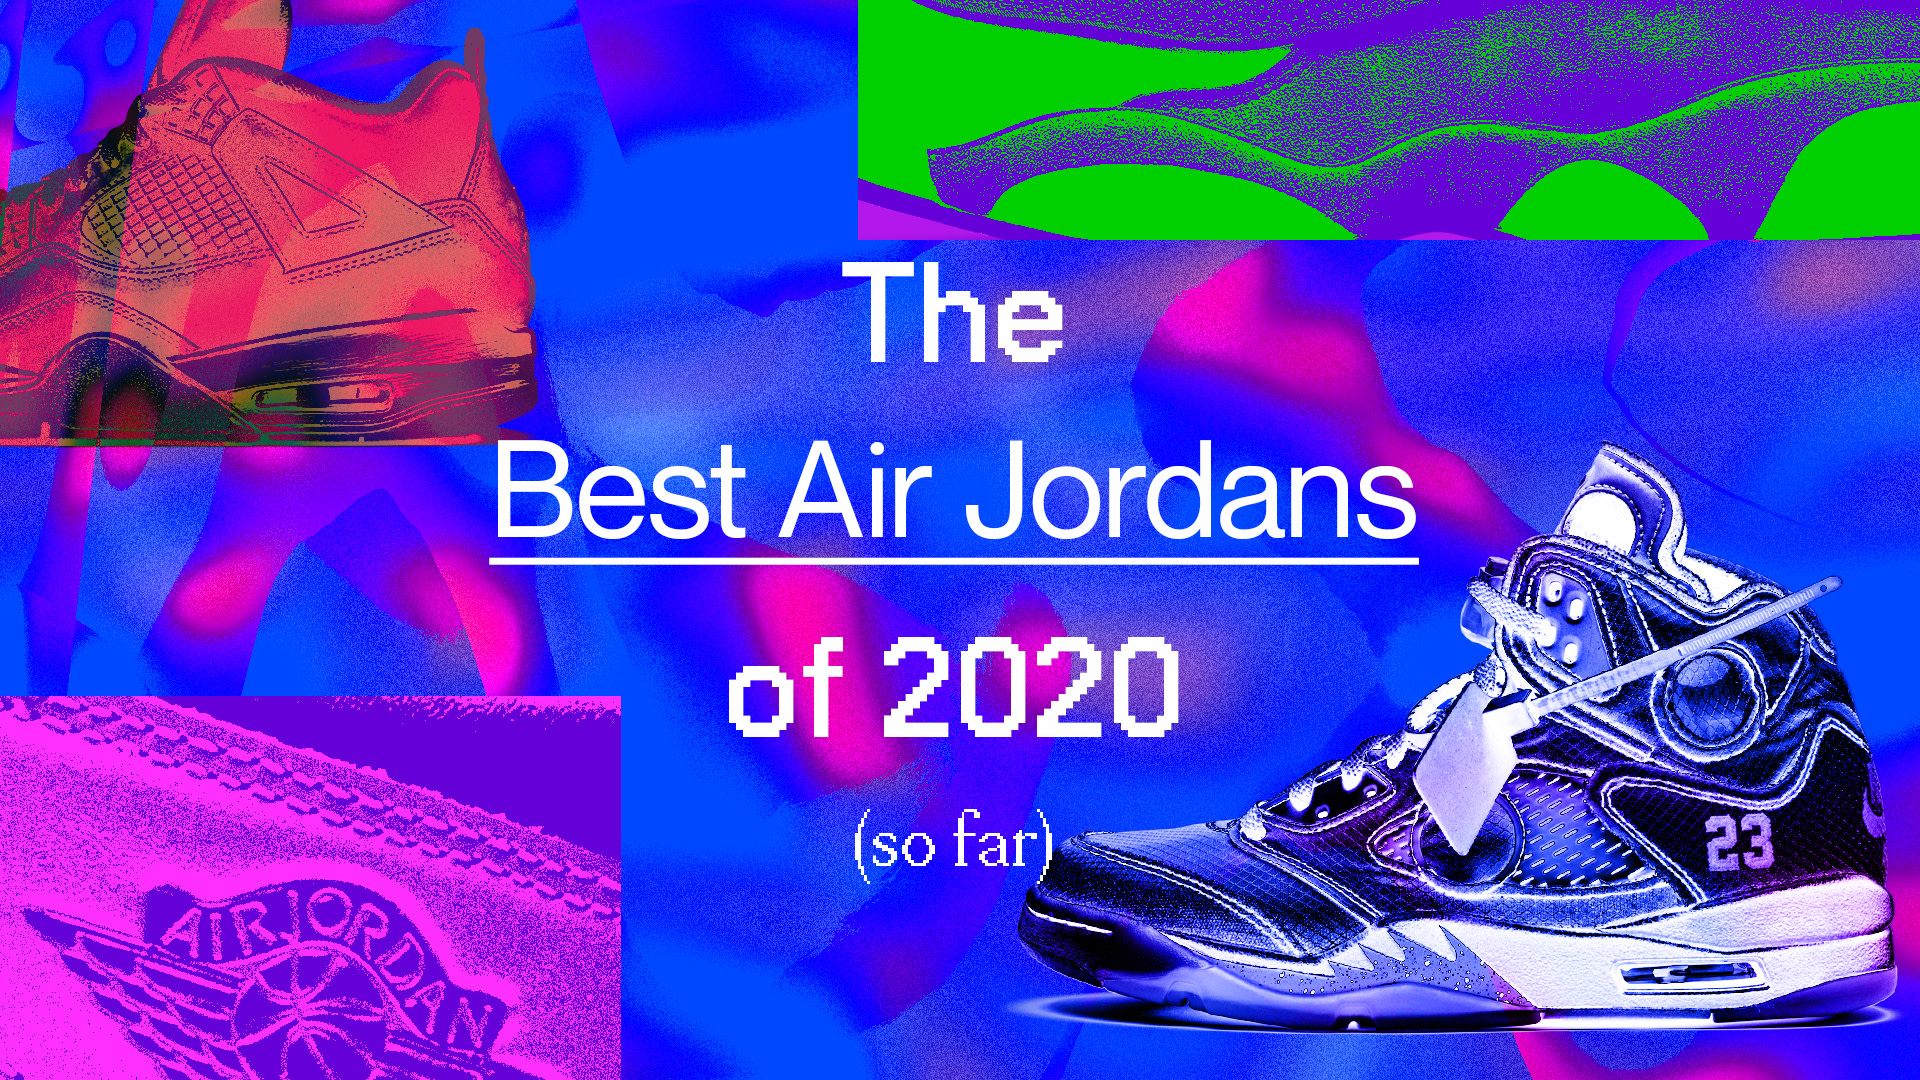 what's the newest jordans out right now